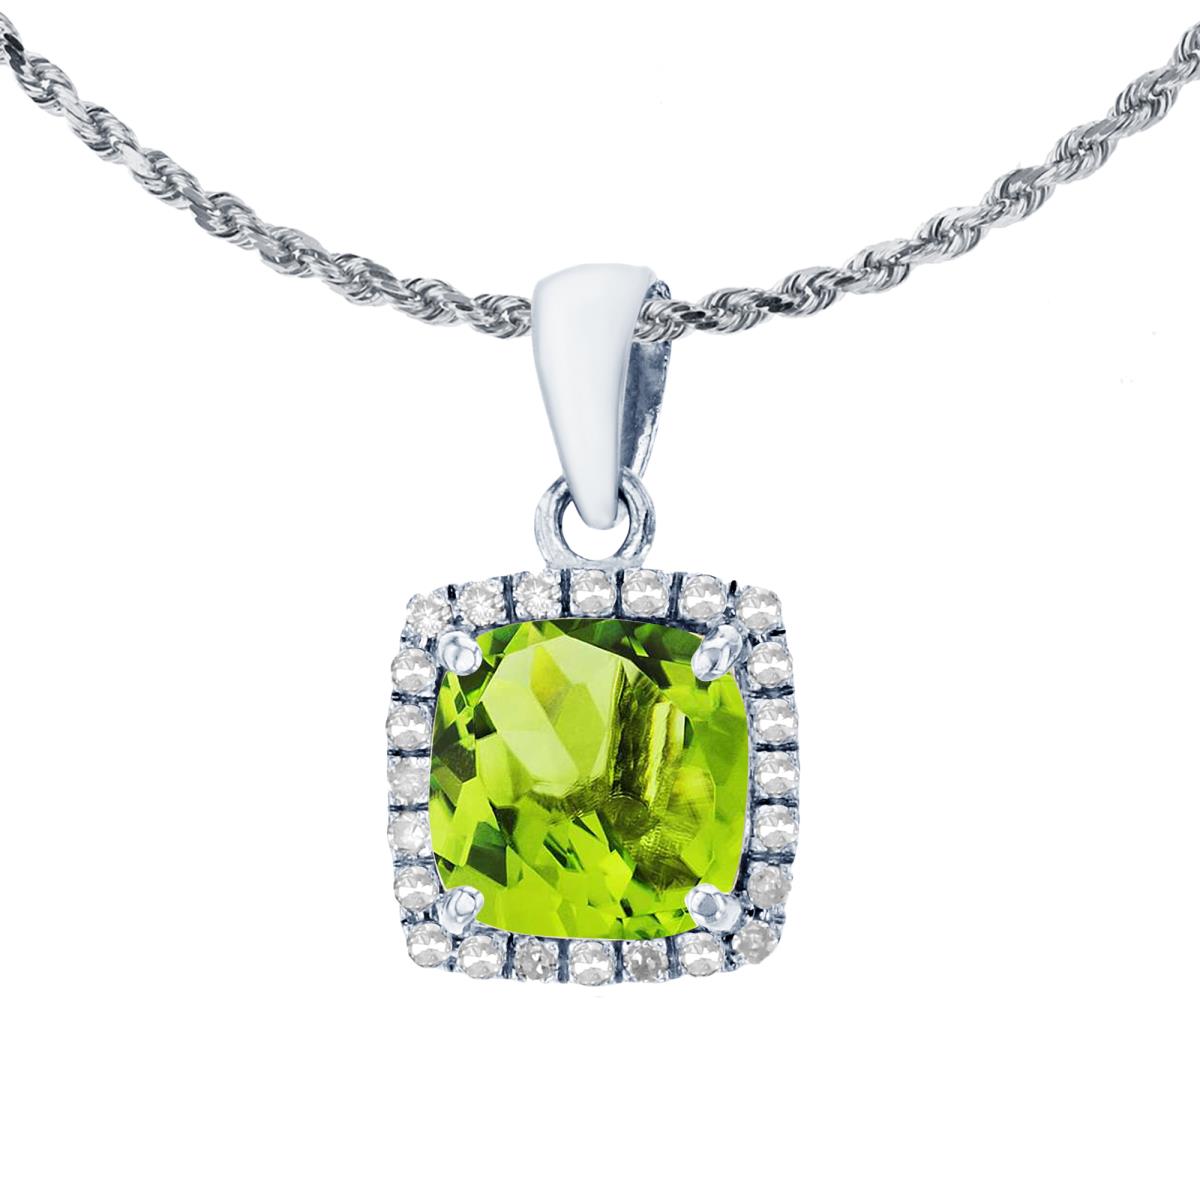 14K White Gold 7mm Cushion Peridot & 0.12 CTTW Diamond Halo 18" Rope Chain Necklace